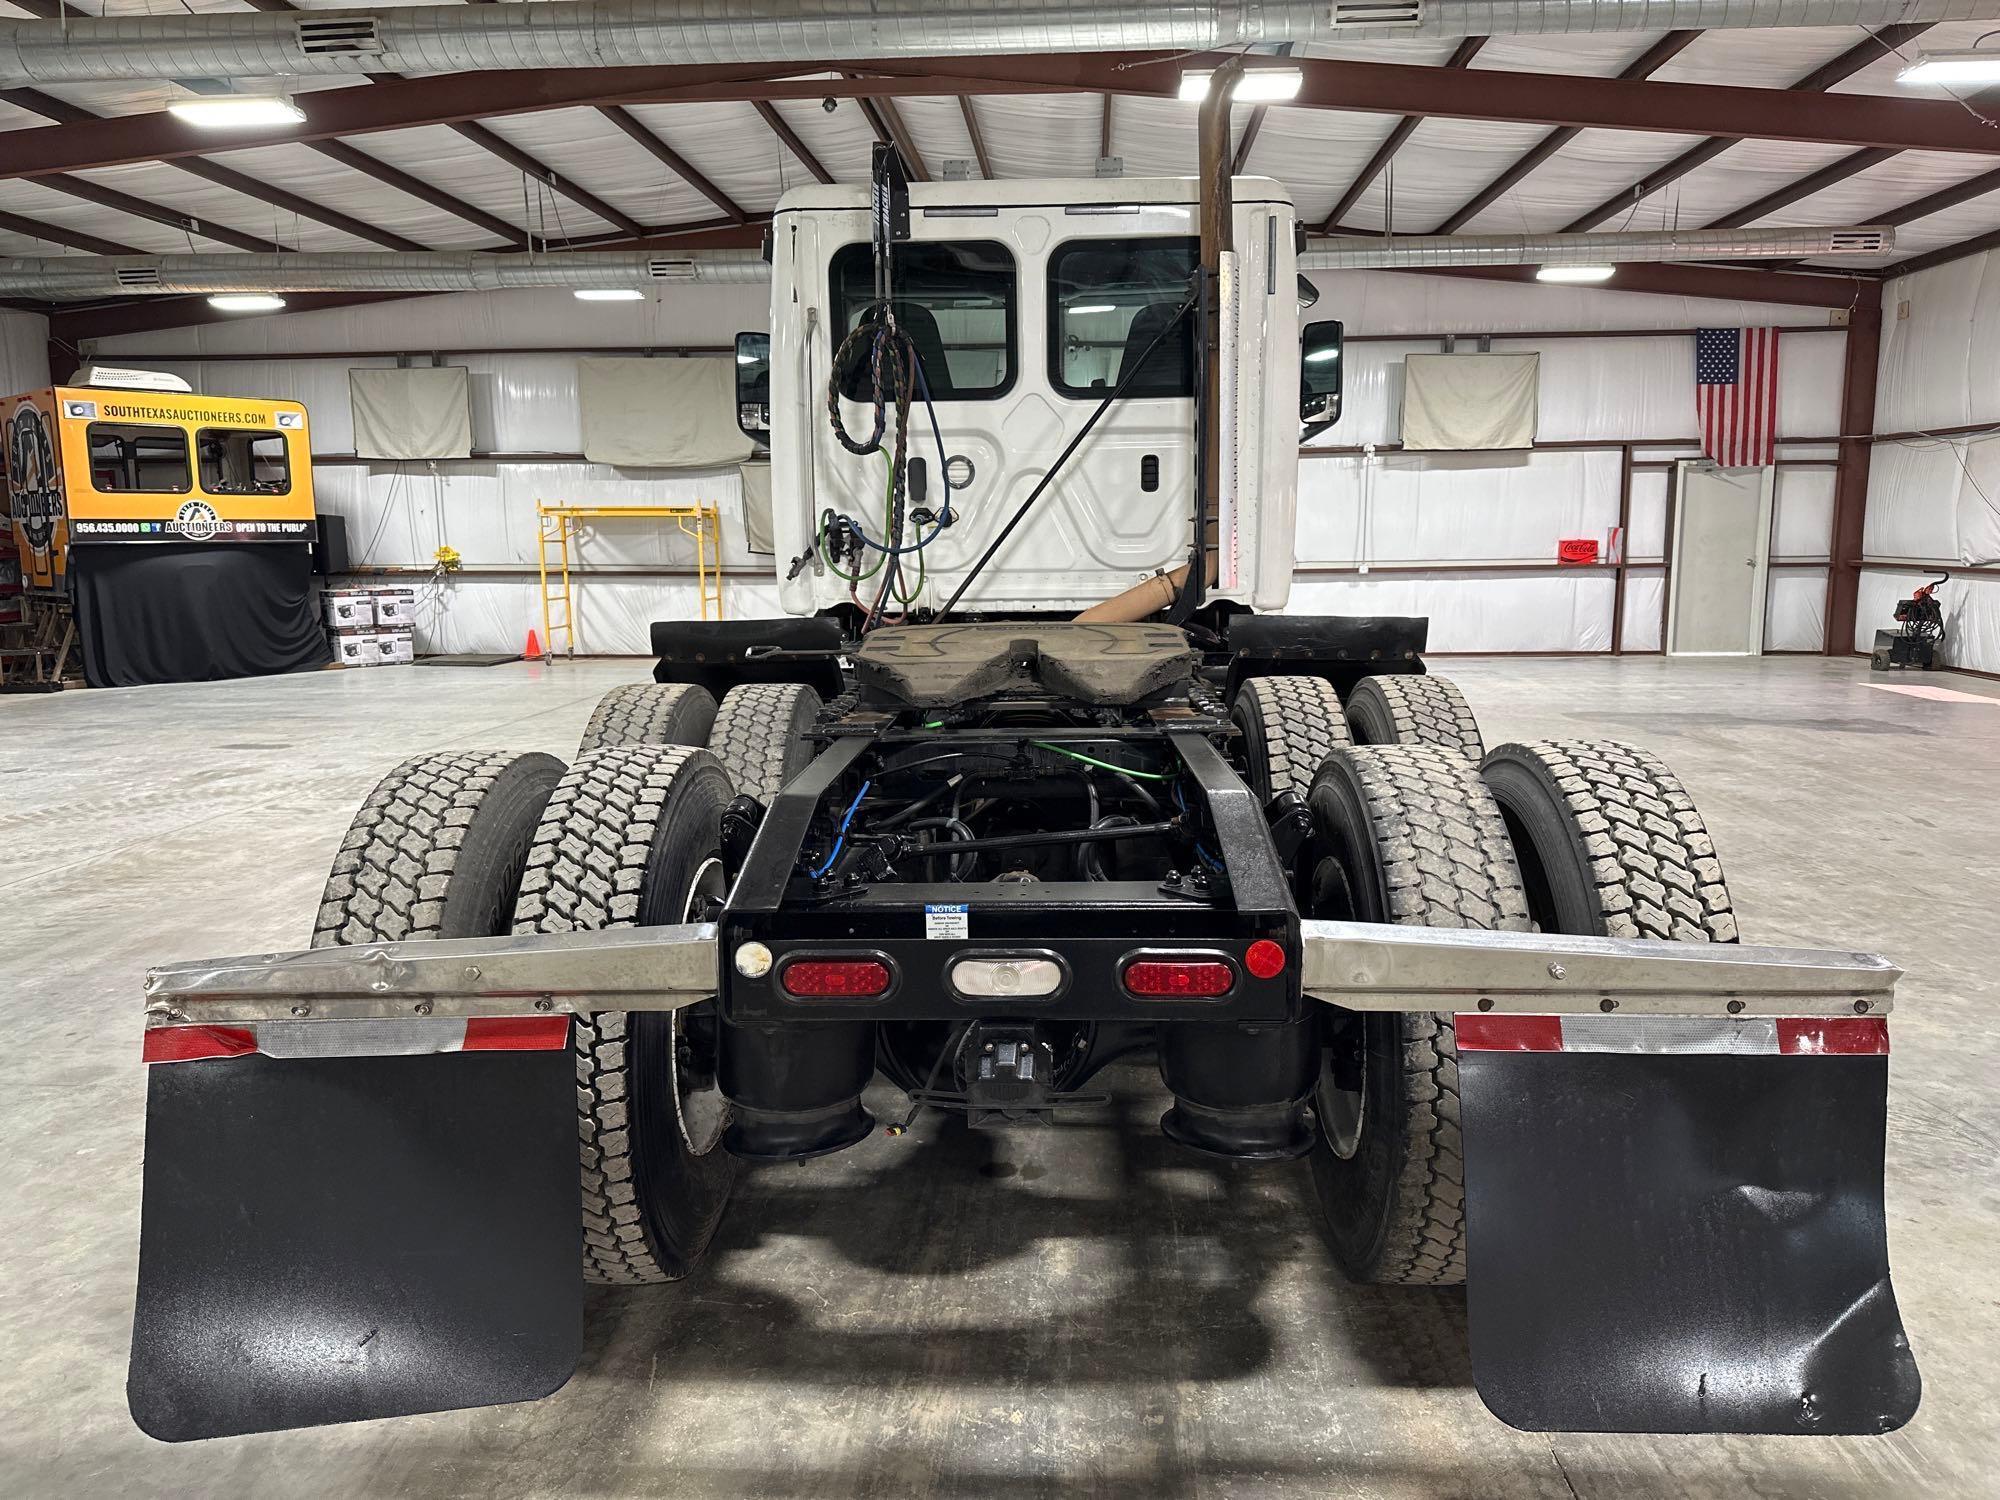 2019 Freightliner Cascadia Day Cab Truck Tractor